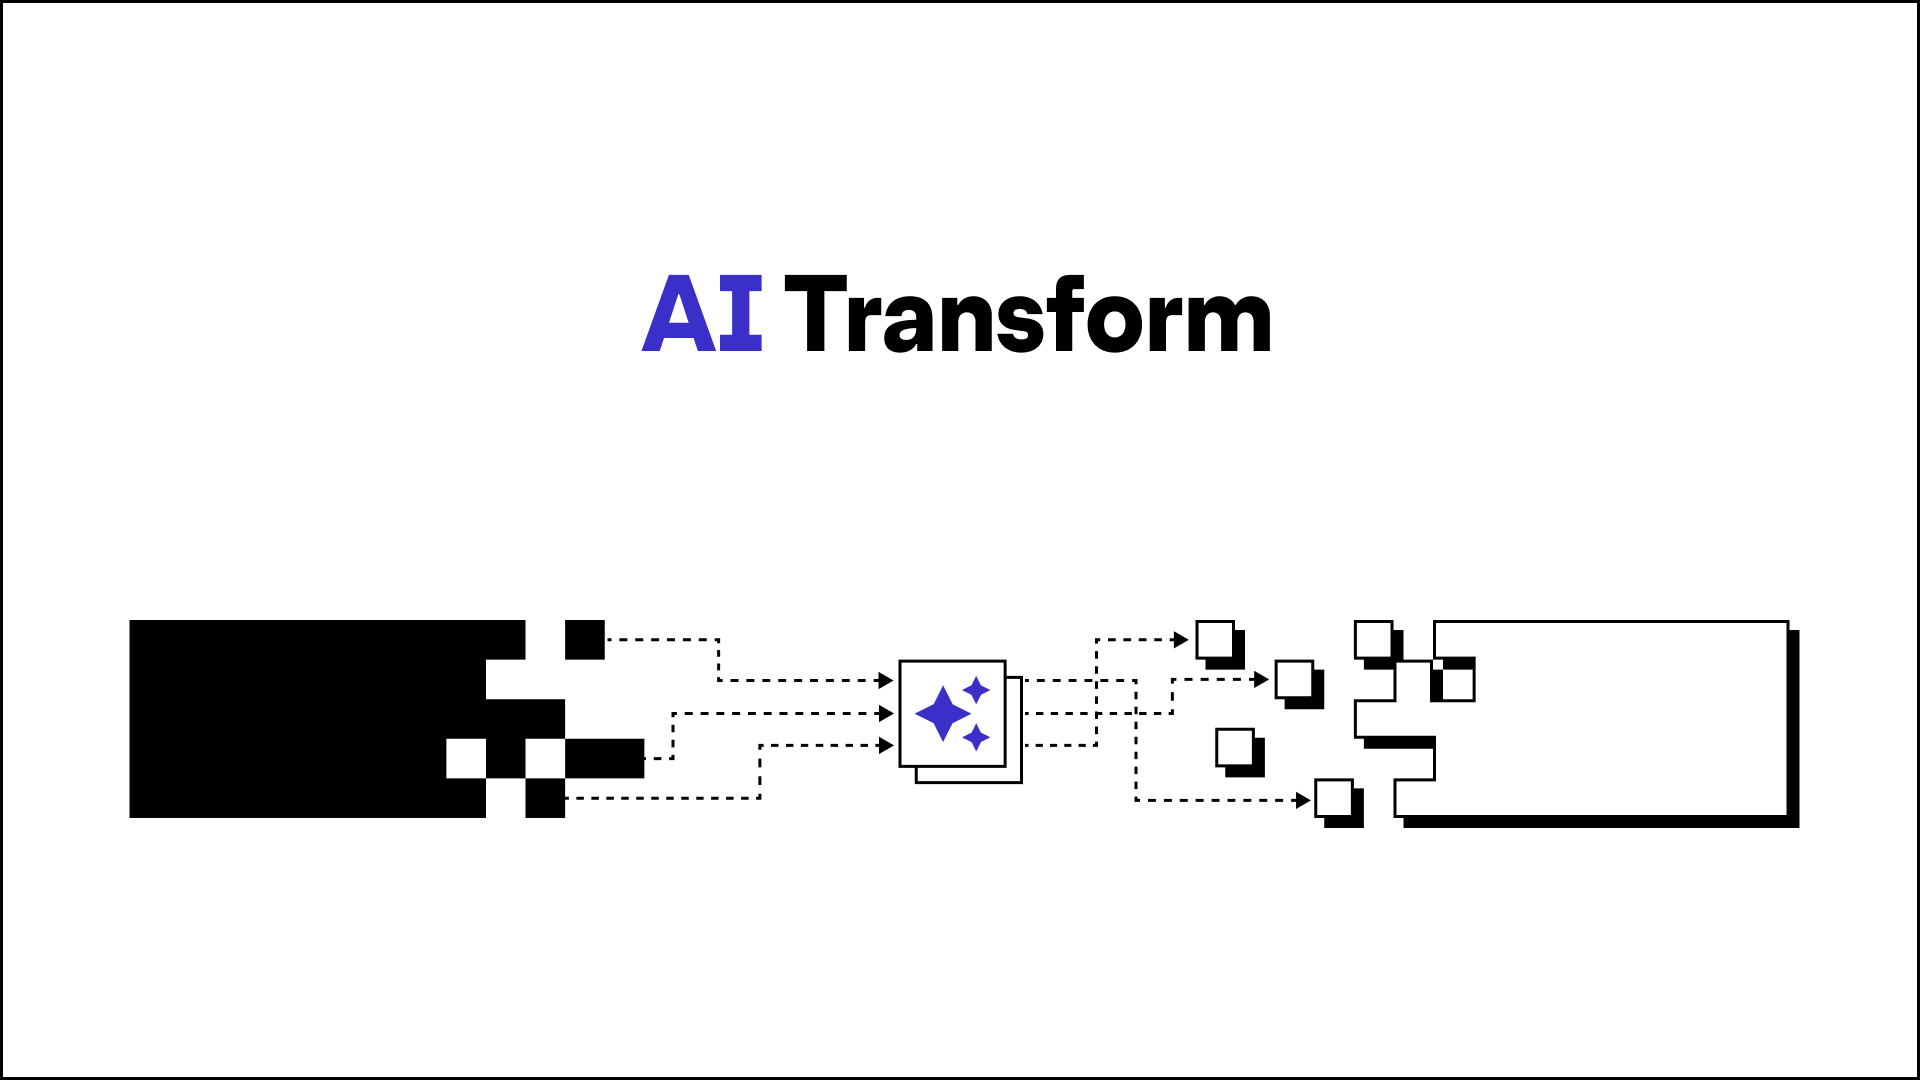 "AI Transform" on a white background with an image representing AI transforming data